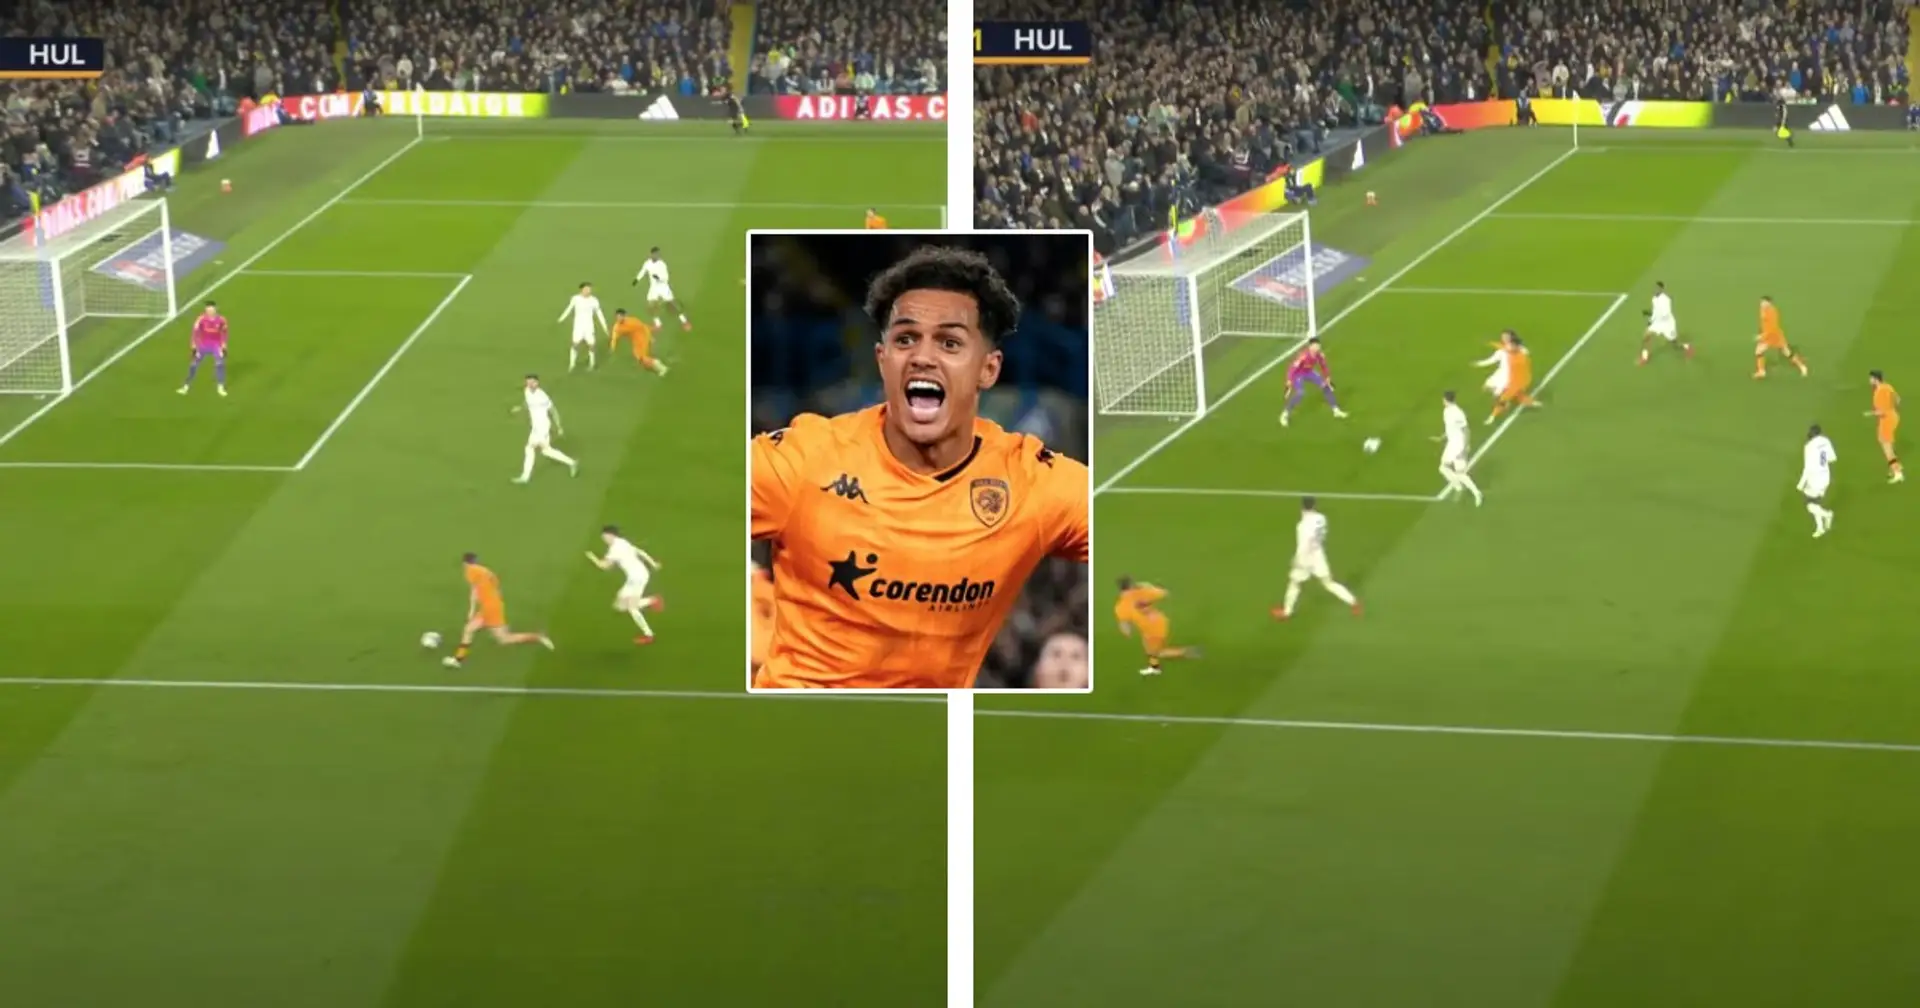 Tyler Morton and Fabio Carvalho combine wonderfully to score for Hull City in Leeds defeat (video)